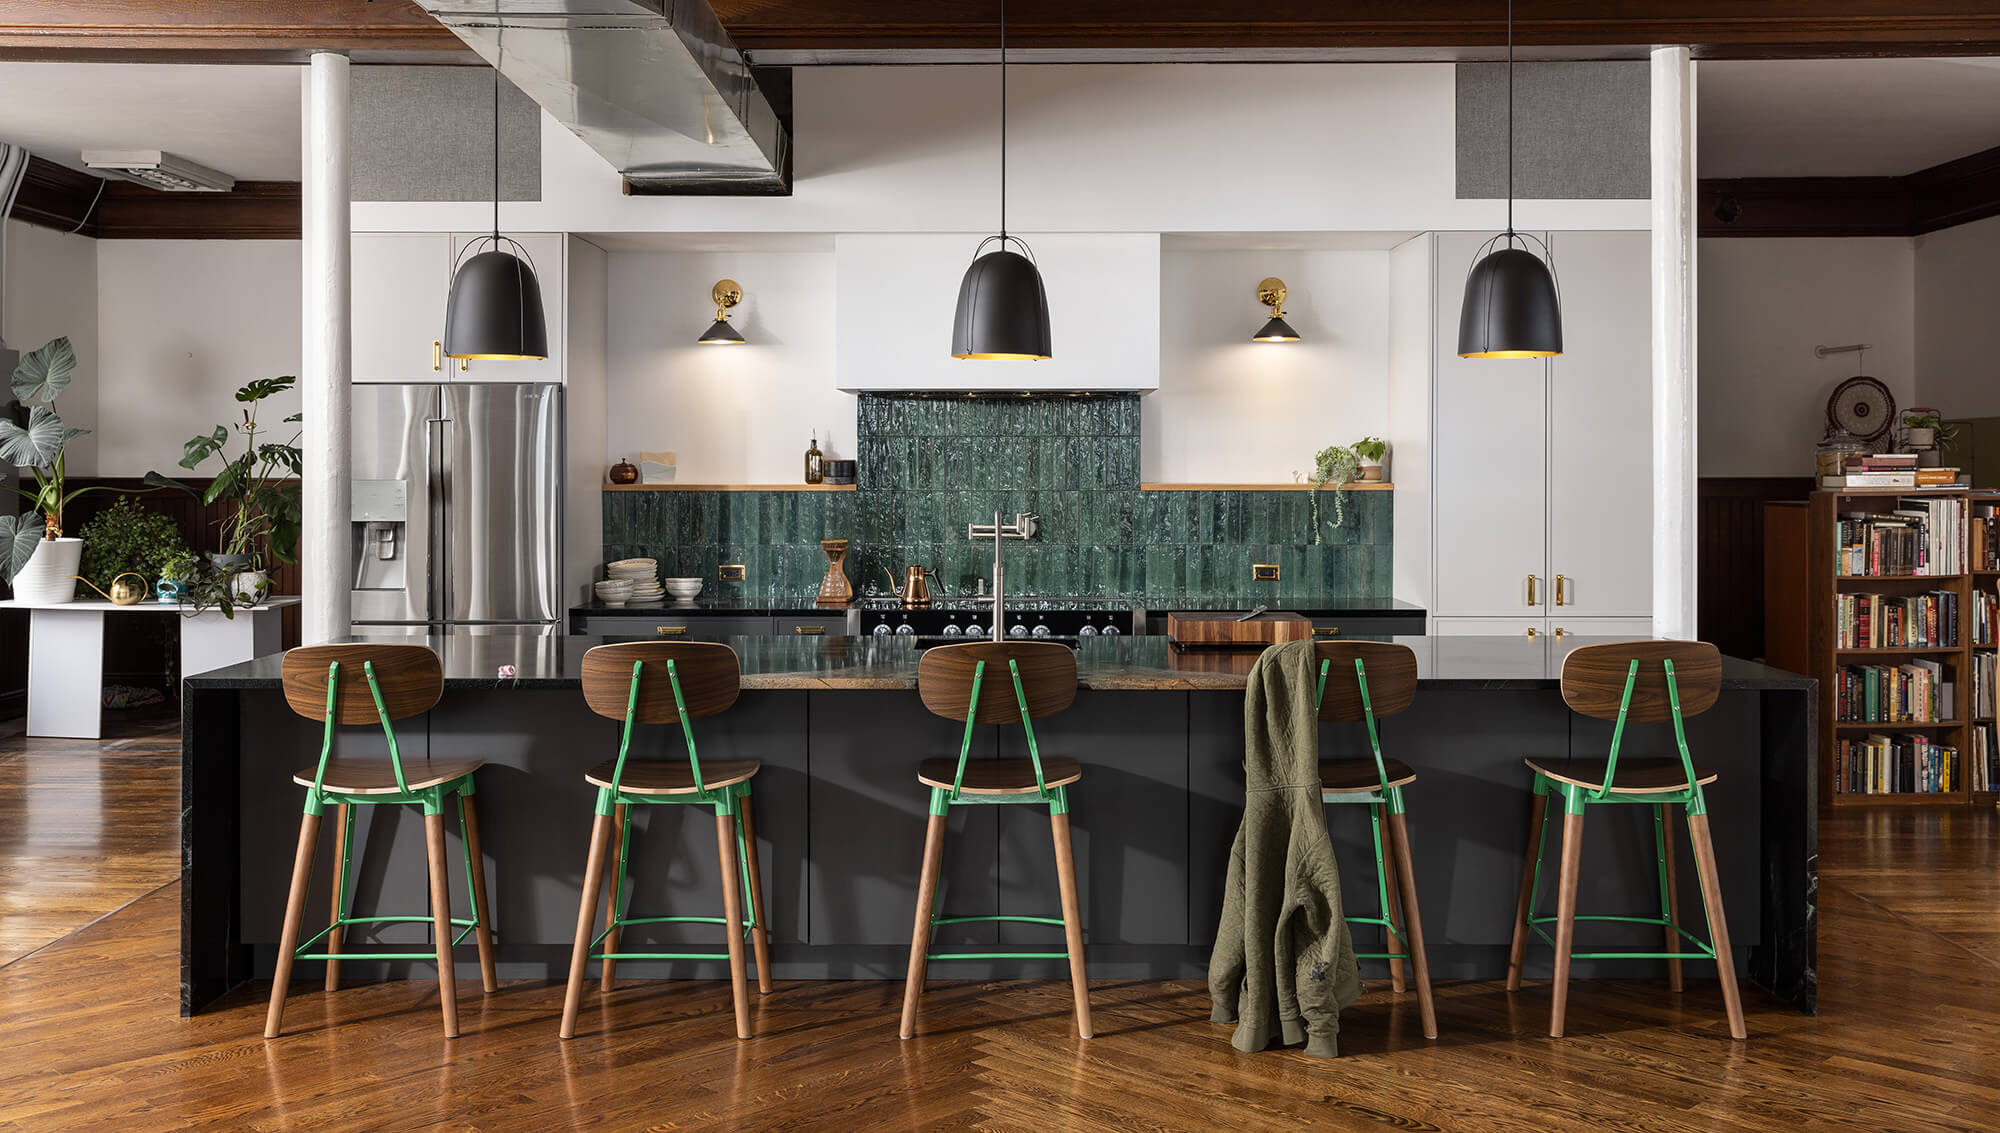 An urban remodel with charcoal gray cabinets with sleek modern shaker cabinets doors with a frameless construction. Featuring an Emerald Green backsplash and true-brown stained wood accents.